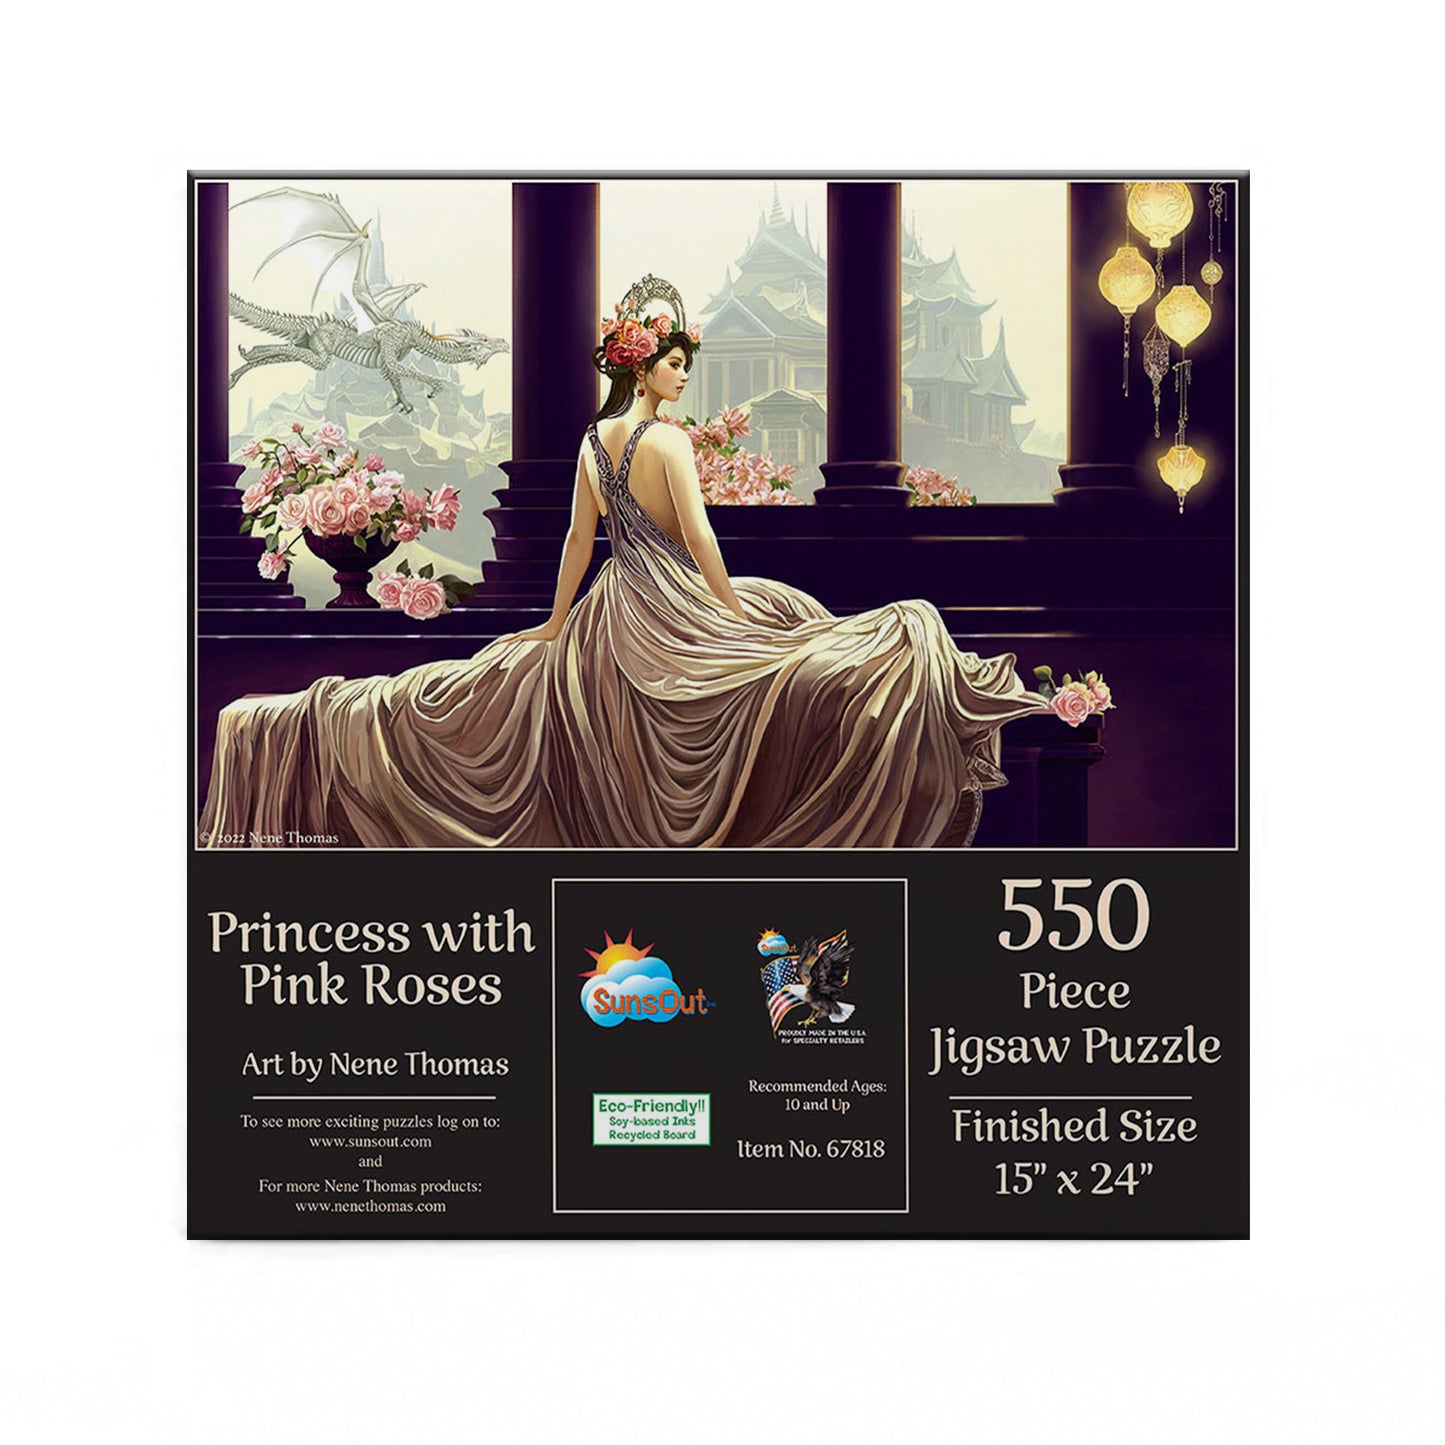 Princess with Pink Roses 550 - 550 Piece Jigsaw Puzzle